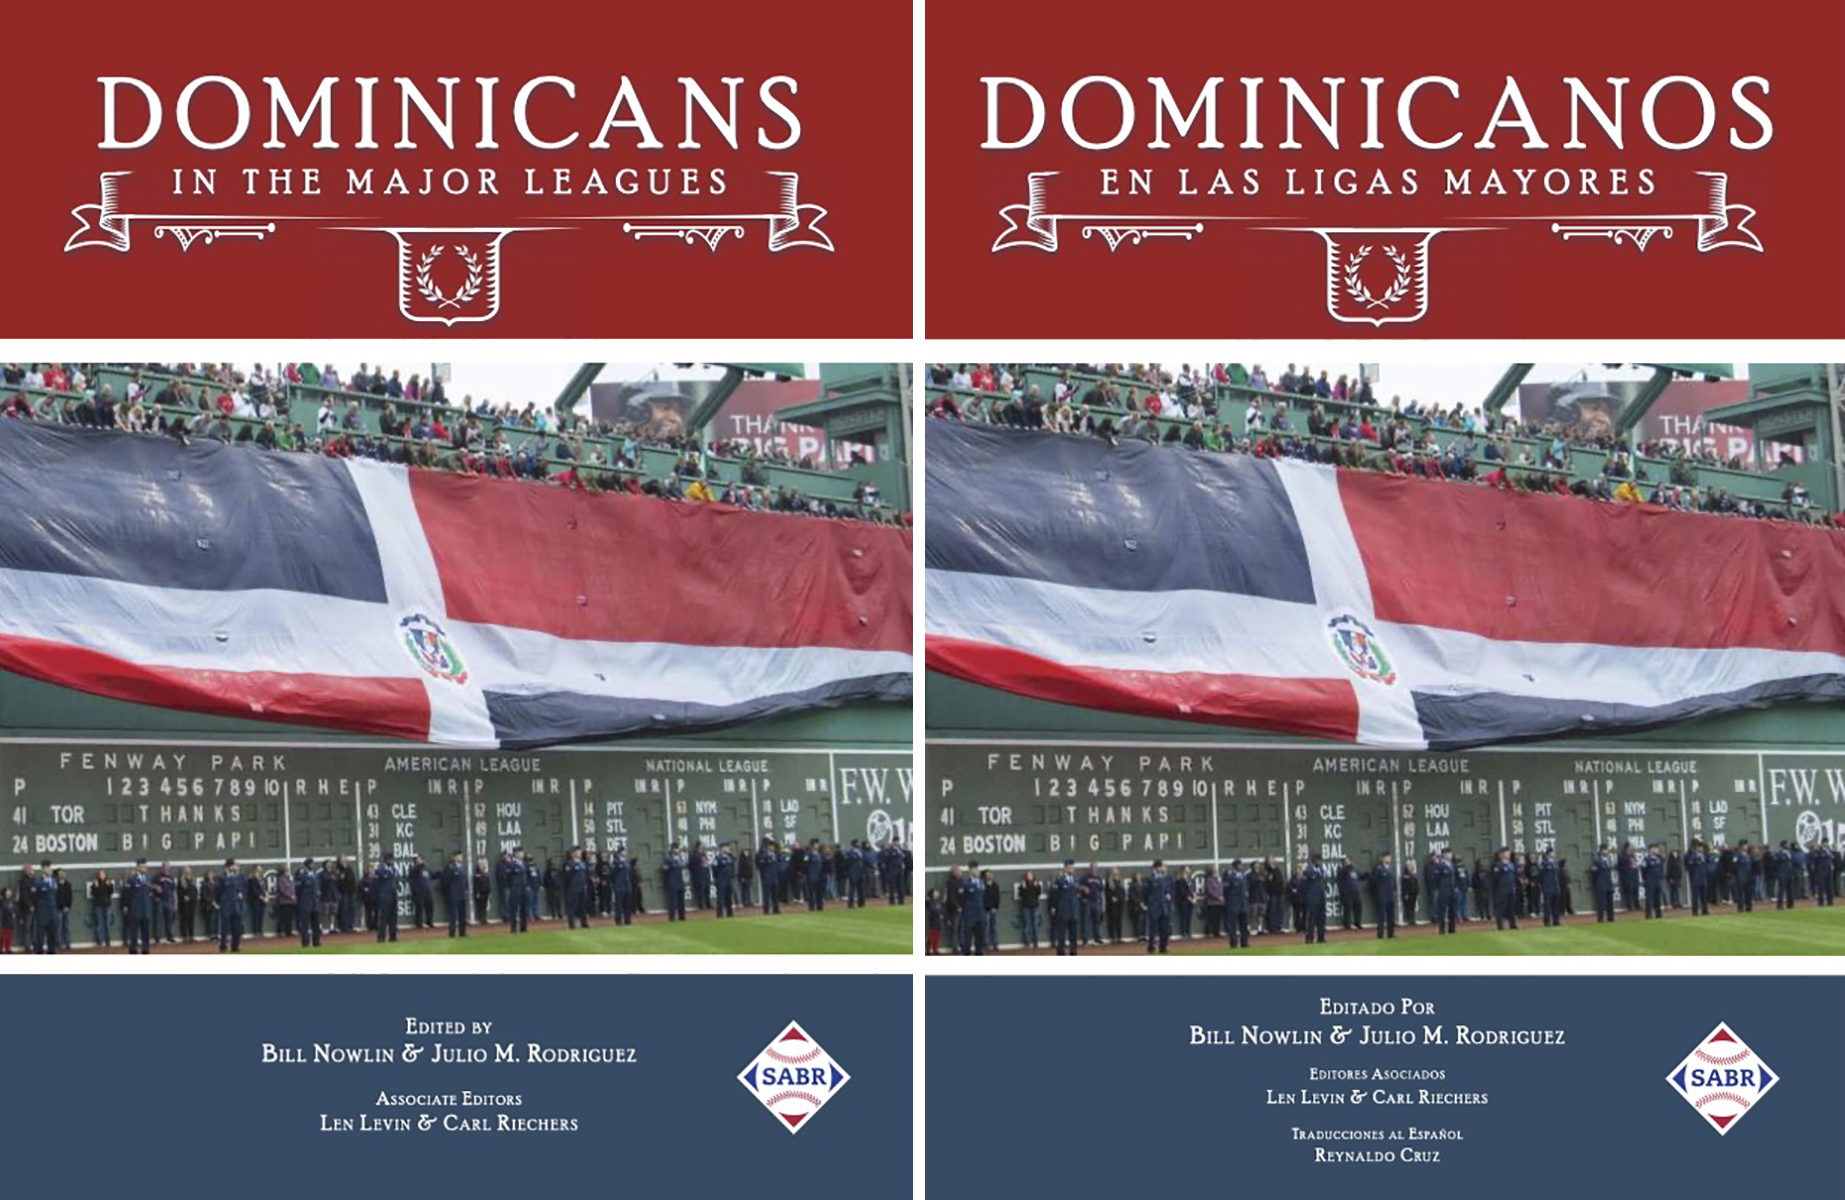 SABR Digital Library: Dominicans in the Major Leagues